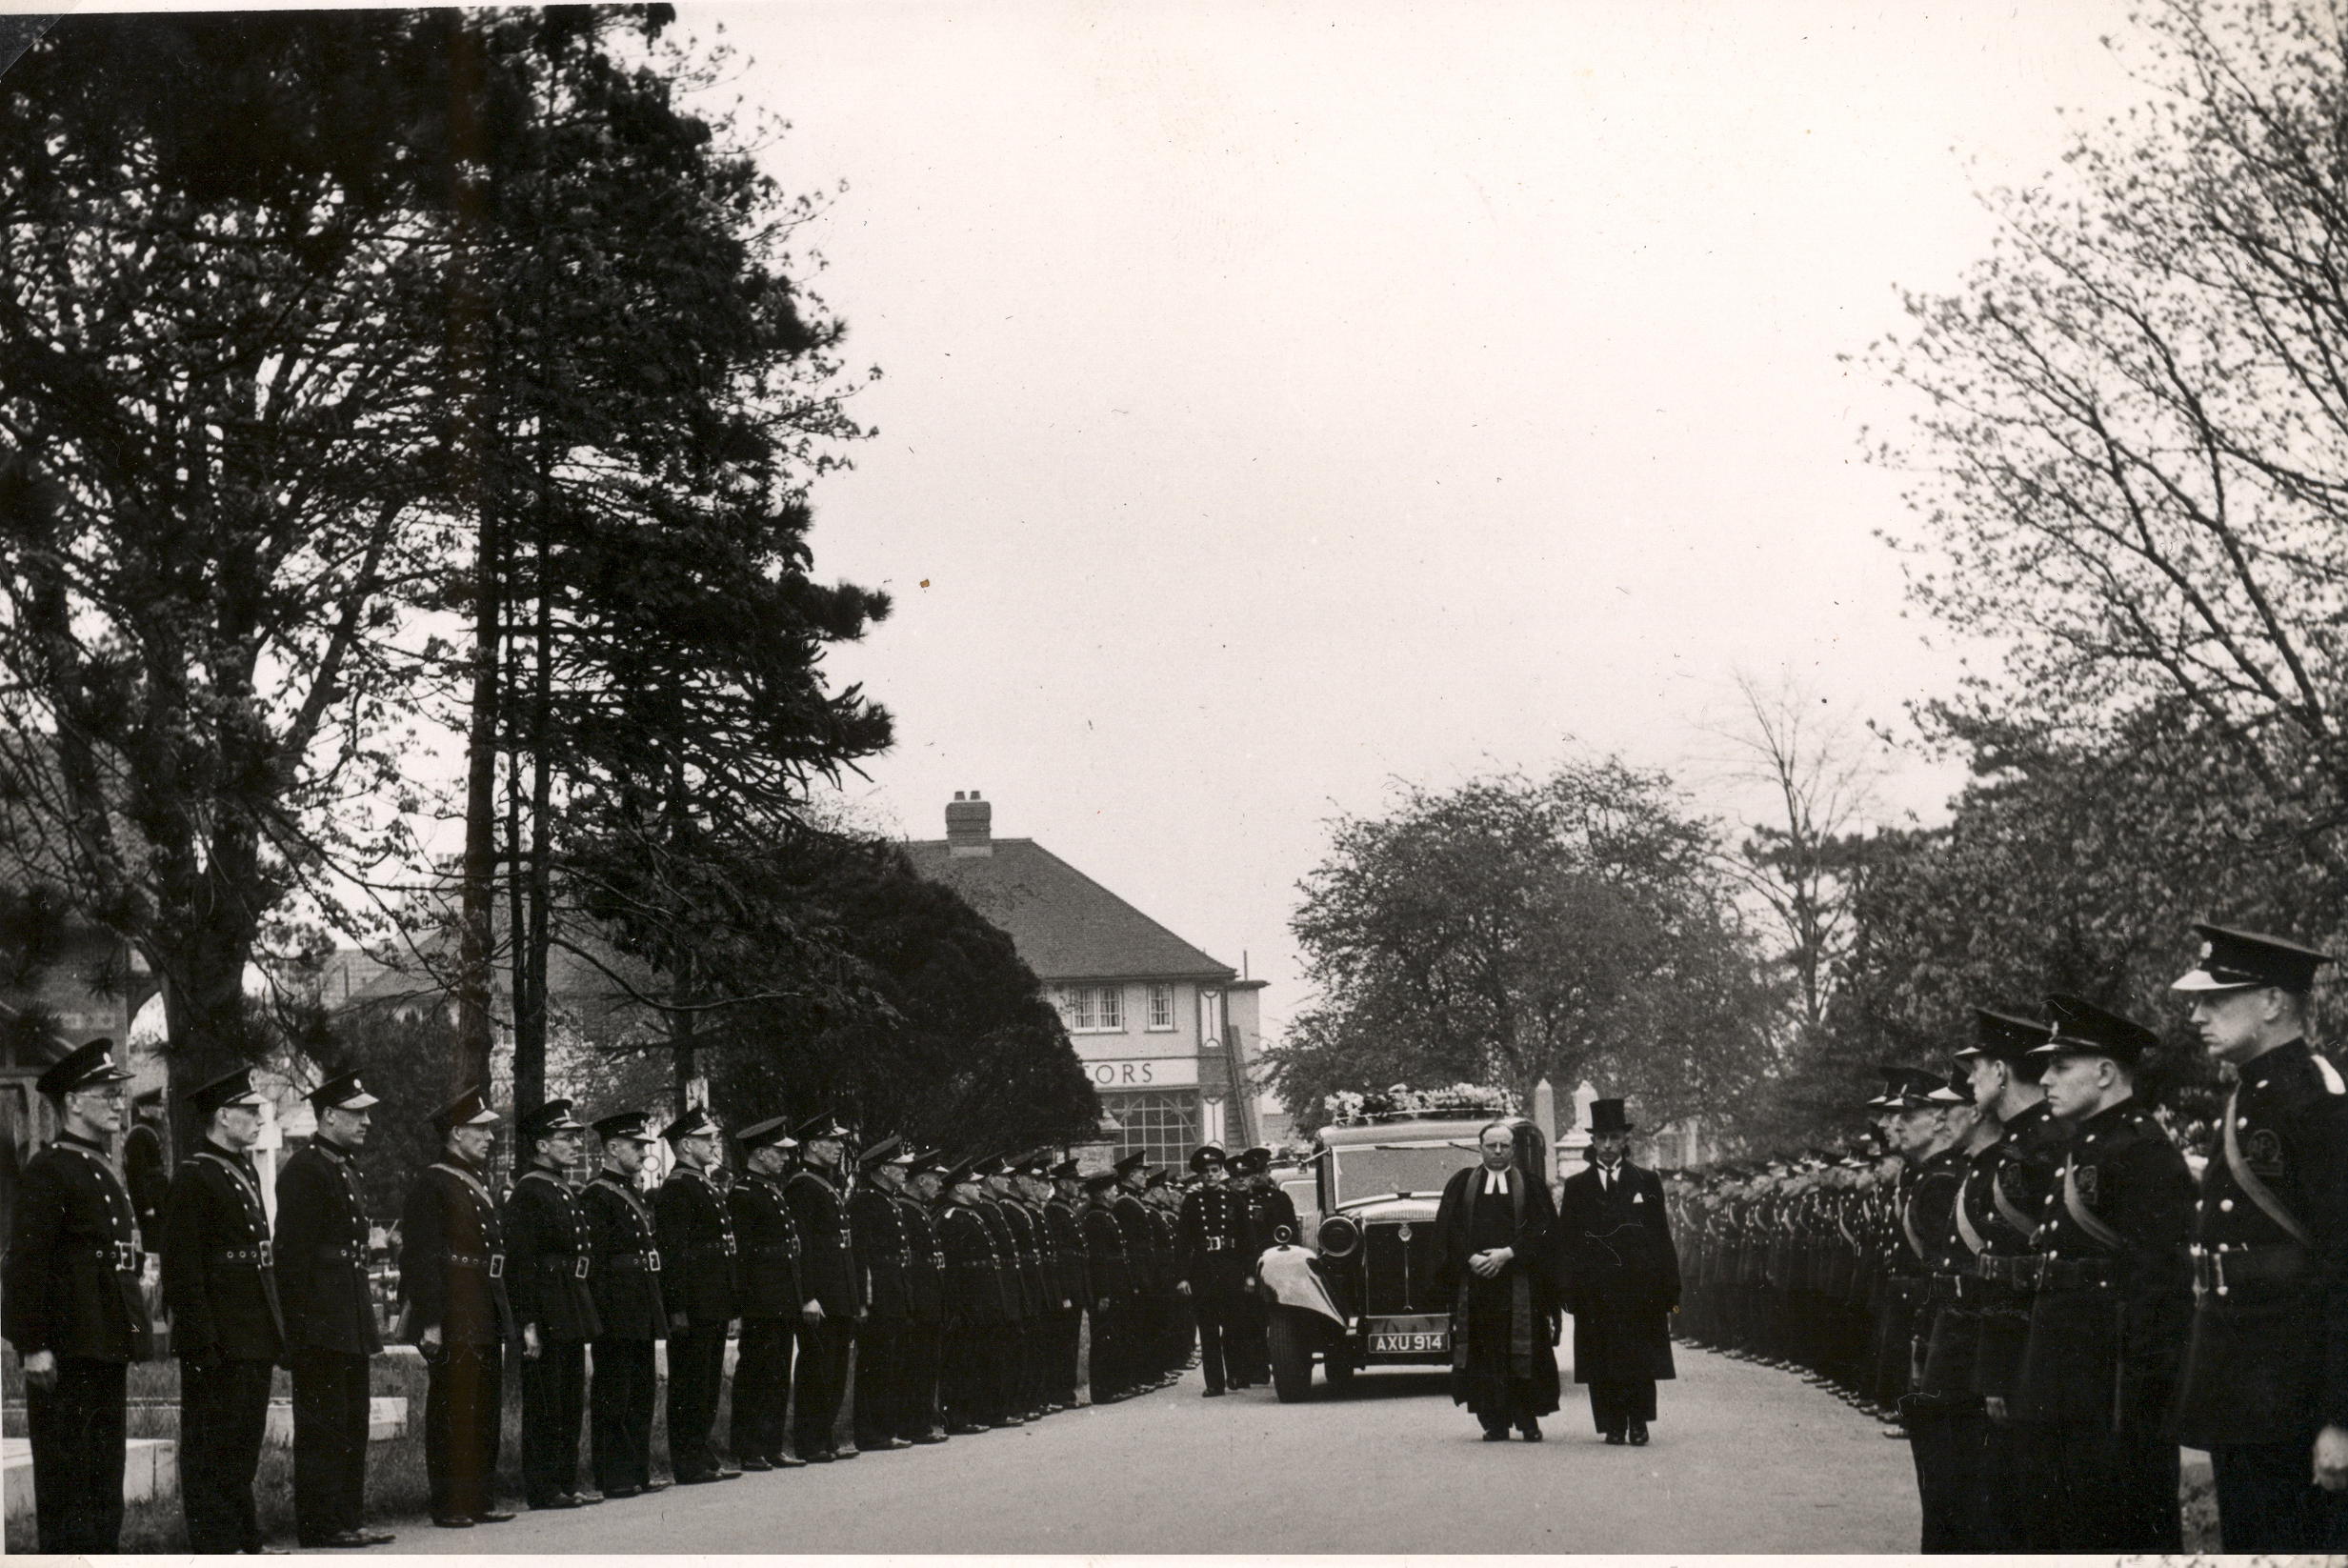 Funeral cortege at cemetery